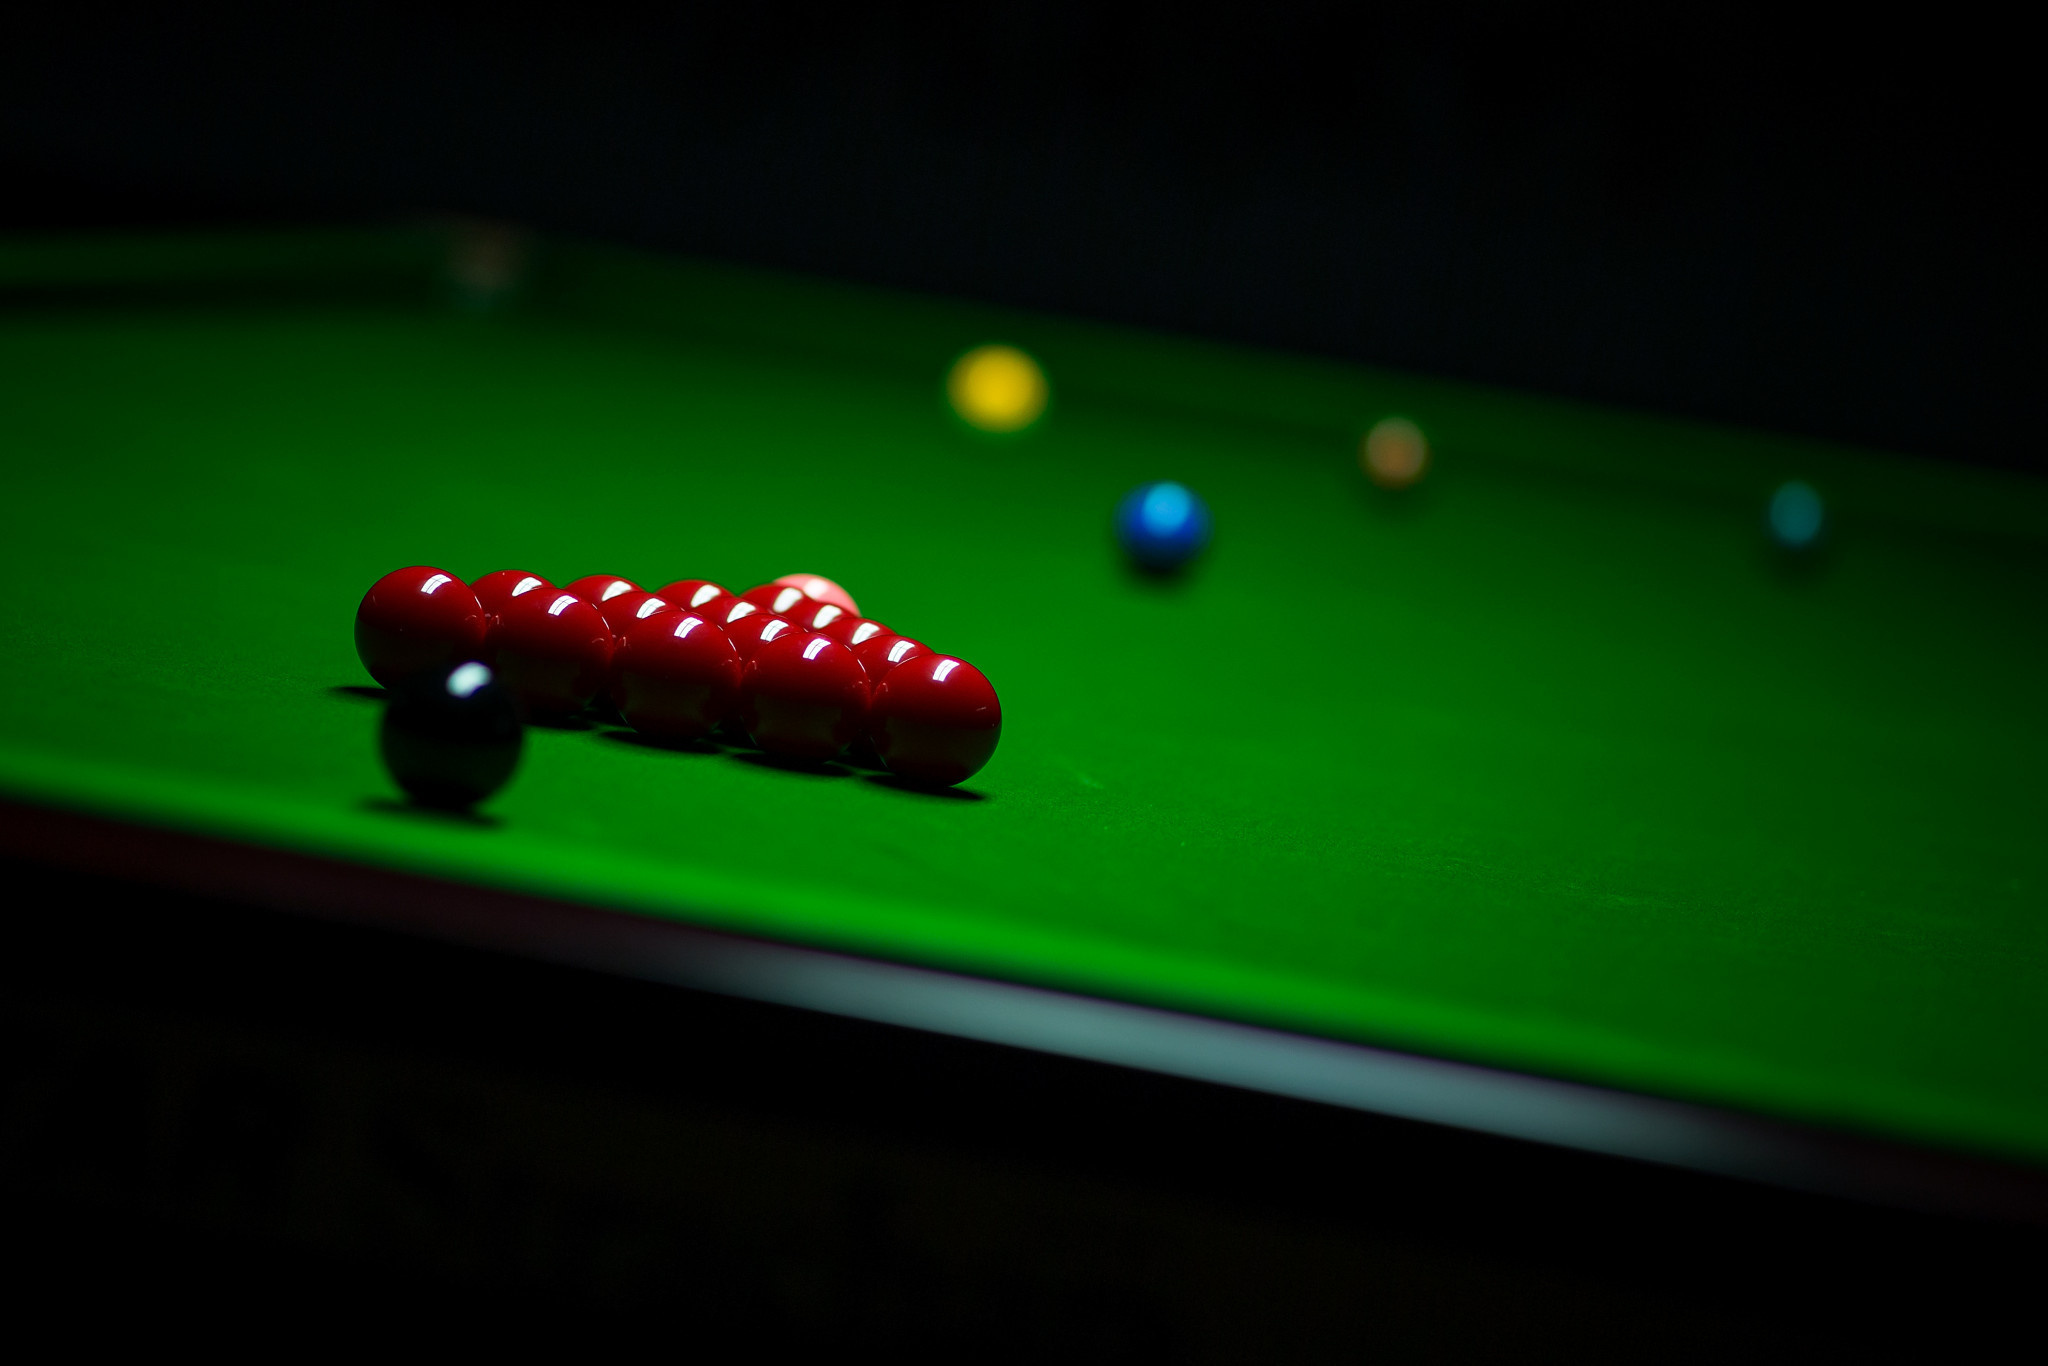 Snooker: A classic English type of cue sport approved by the WPBSA. 2050x1370 HD Wallpaper.